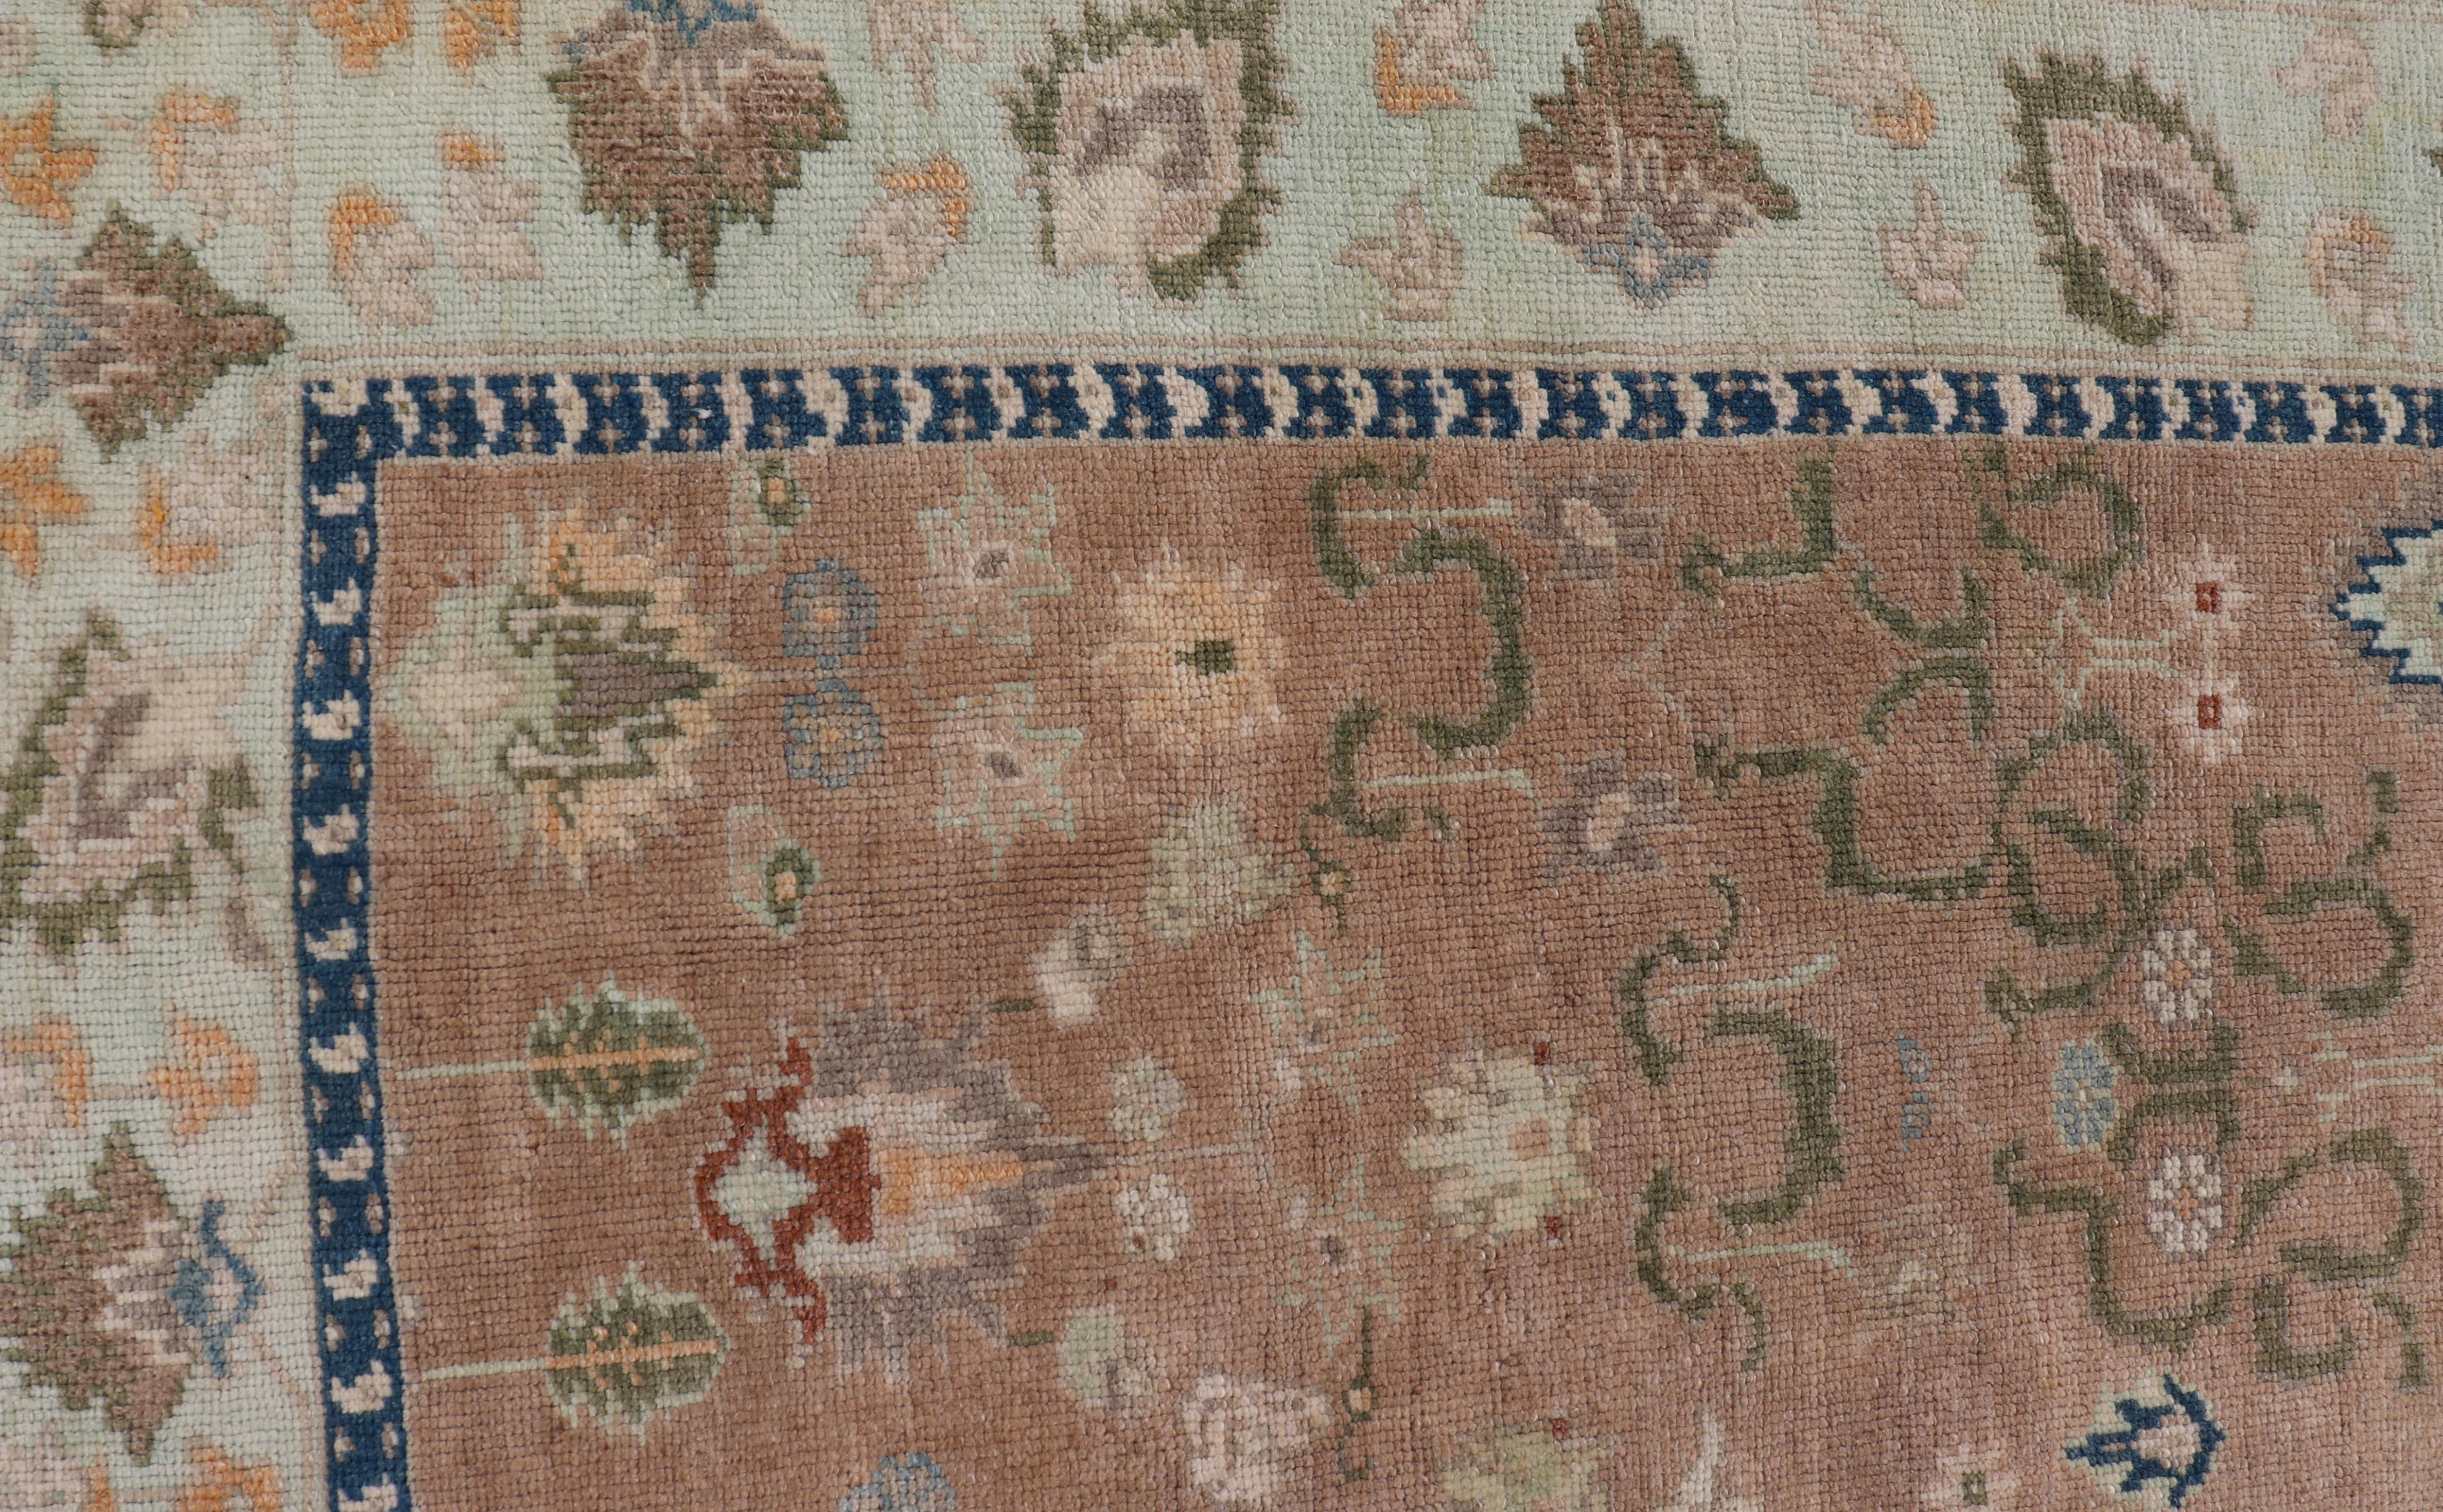 Mid-20th Century Colorful Turkish Oushak Rug in Salmon Background with All-Over Floral Design For Sale